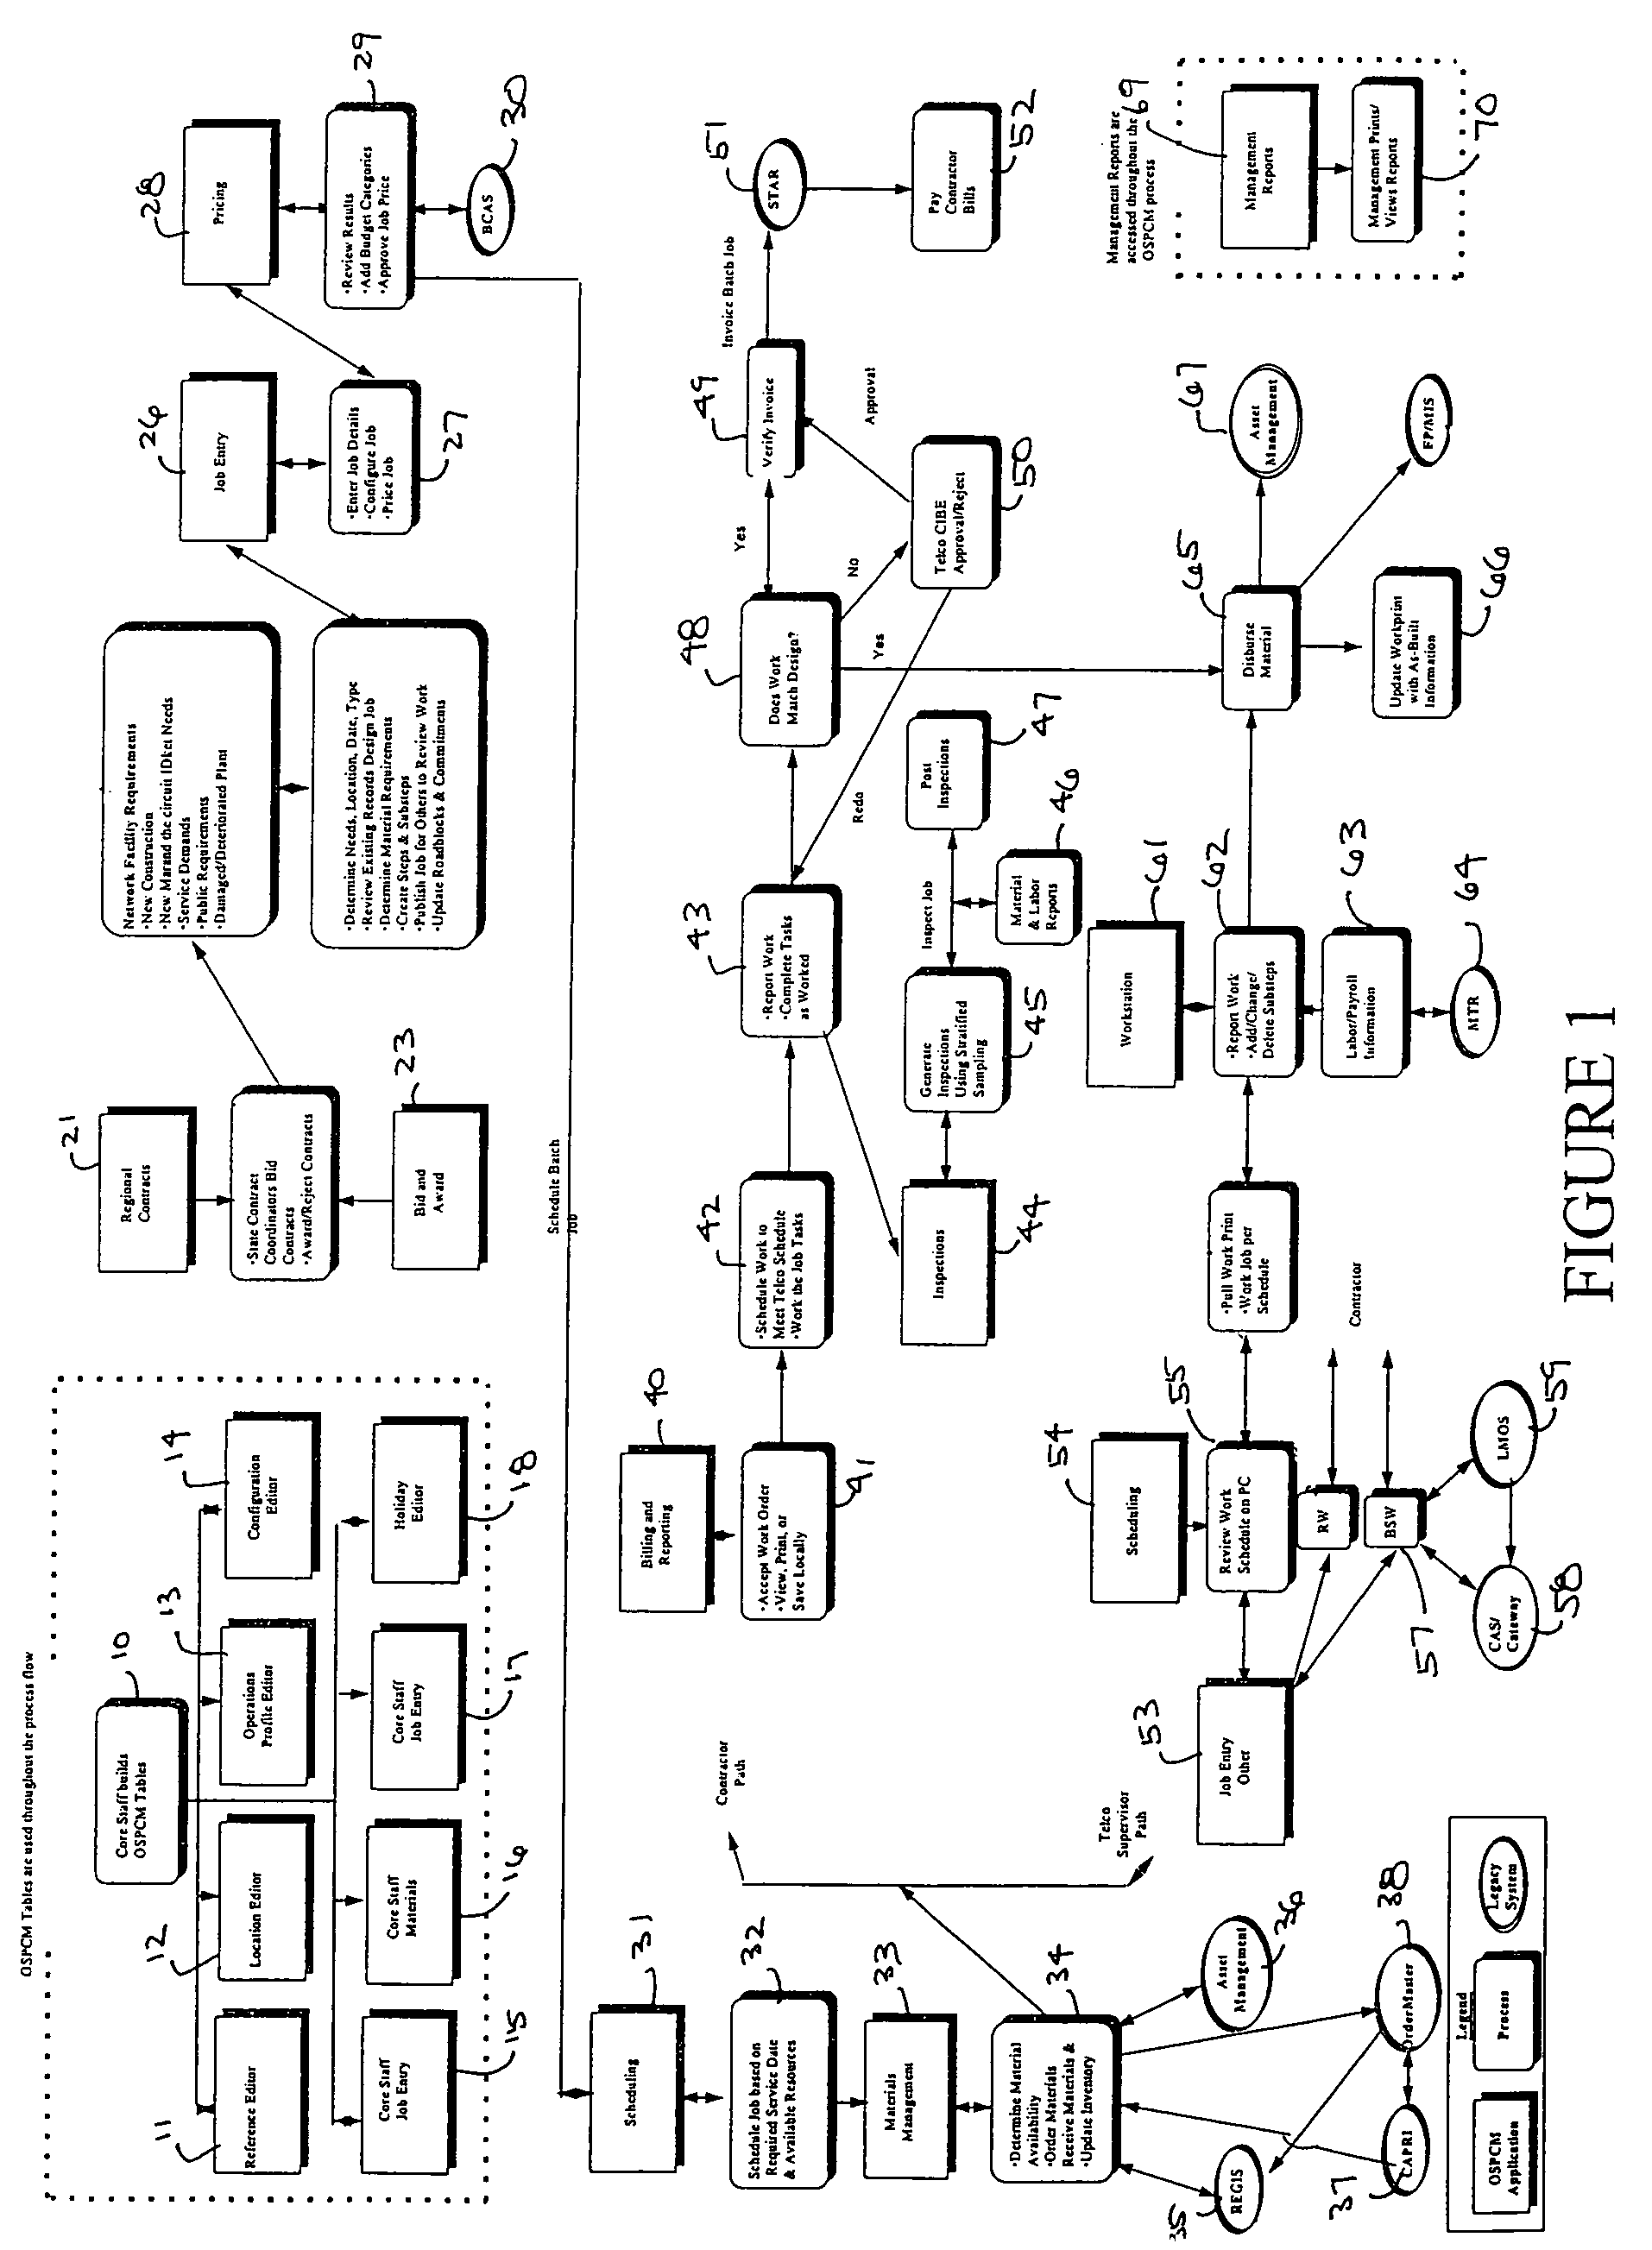 System and Method for Facilitating Managing a Job